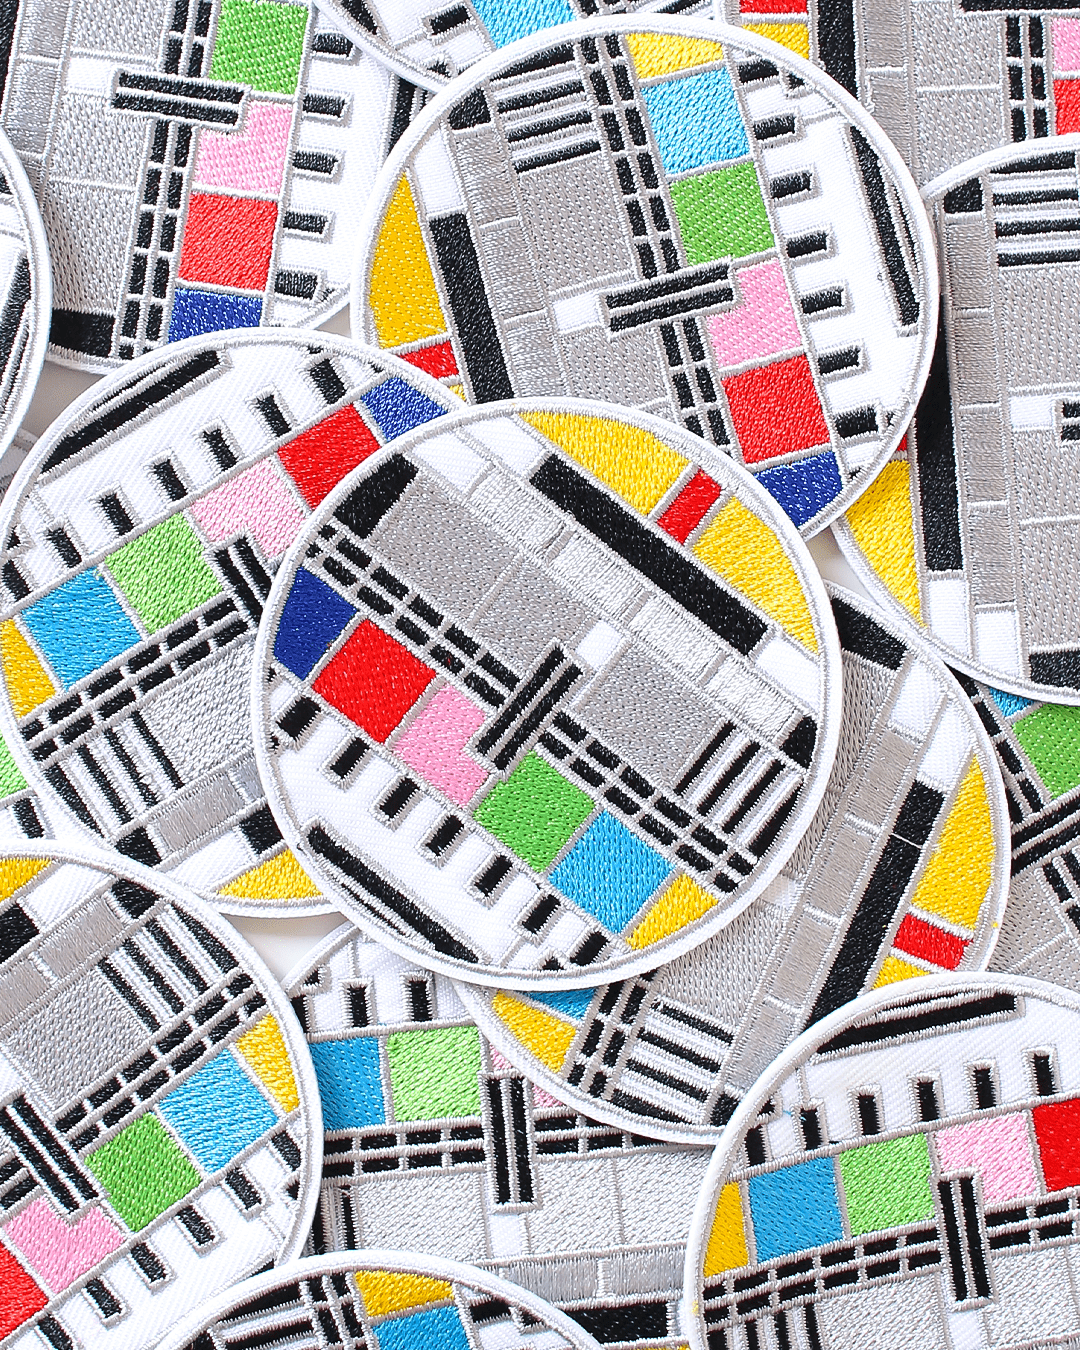 Television Test Card Patch - Embroidered Iron On Clothes Patch - Television Test Card Patch